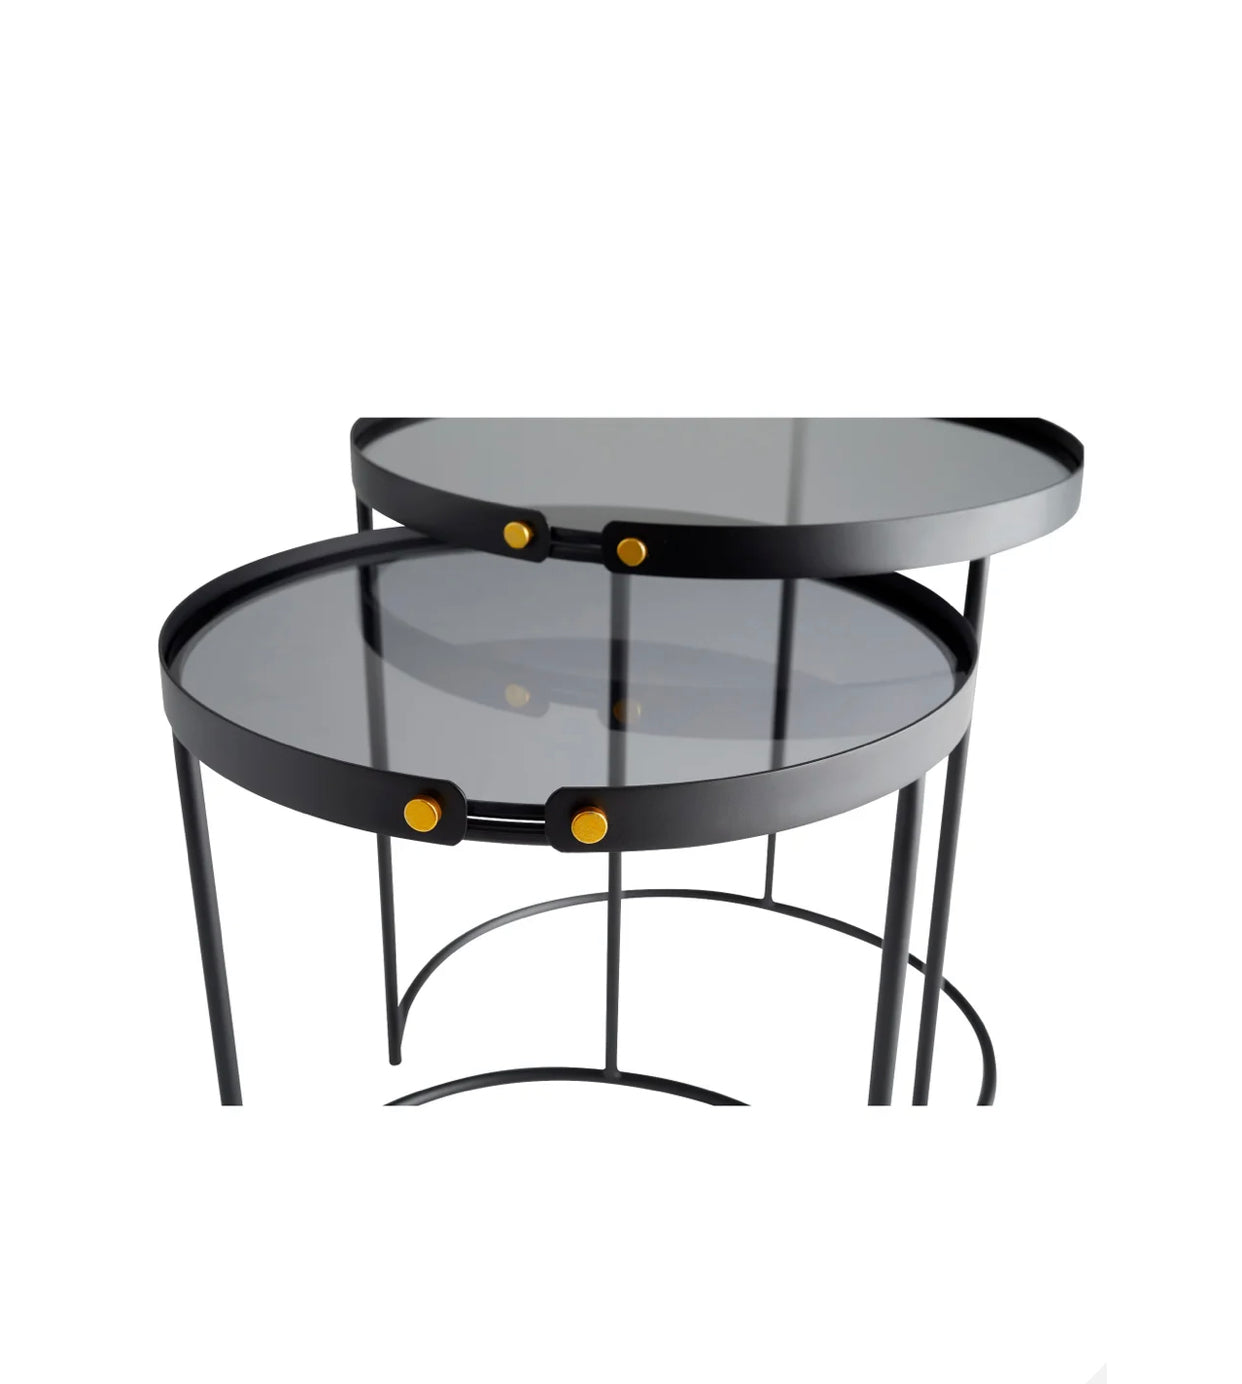 This 2-piece table set consists of a slender design and is rendered in a regal dark monochrome. The table top is glass and is gracefully supported by a semi-circular base.  Qty Available: 1  Dimensions: L 19.00 X W 19.00 X H 20.00  Weight: 27.3 lbs.  Finish: Graphite Materials: Iron/Glass